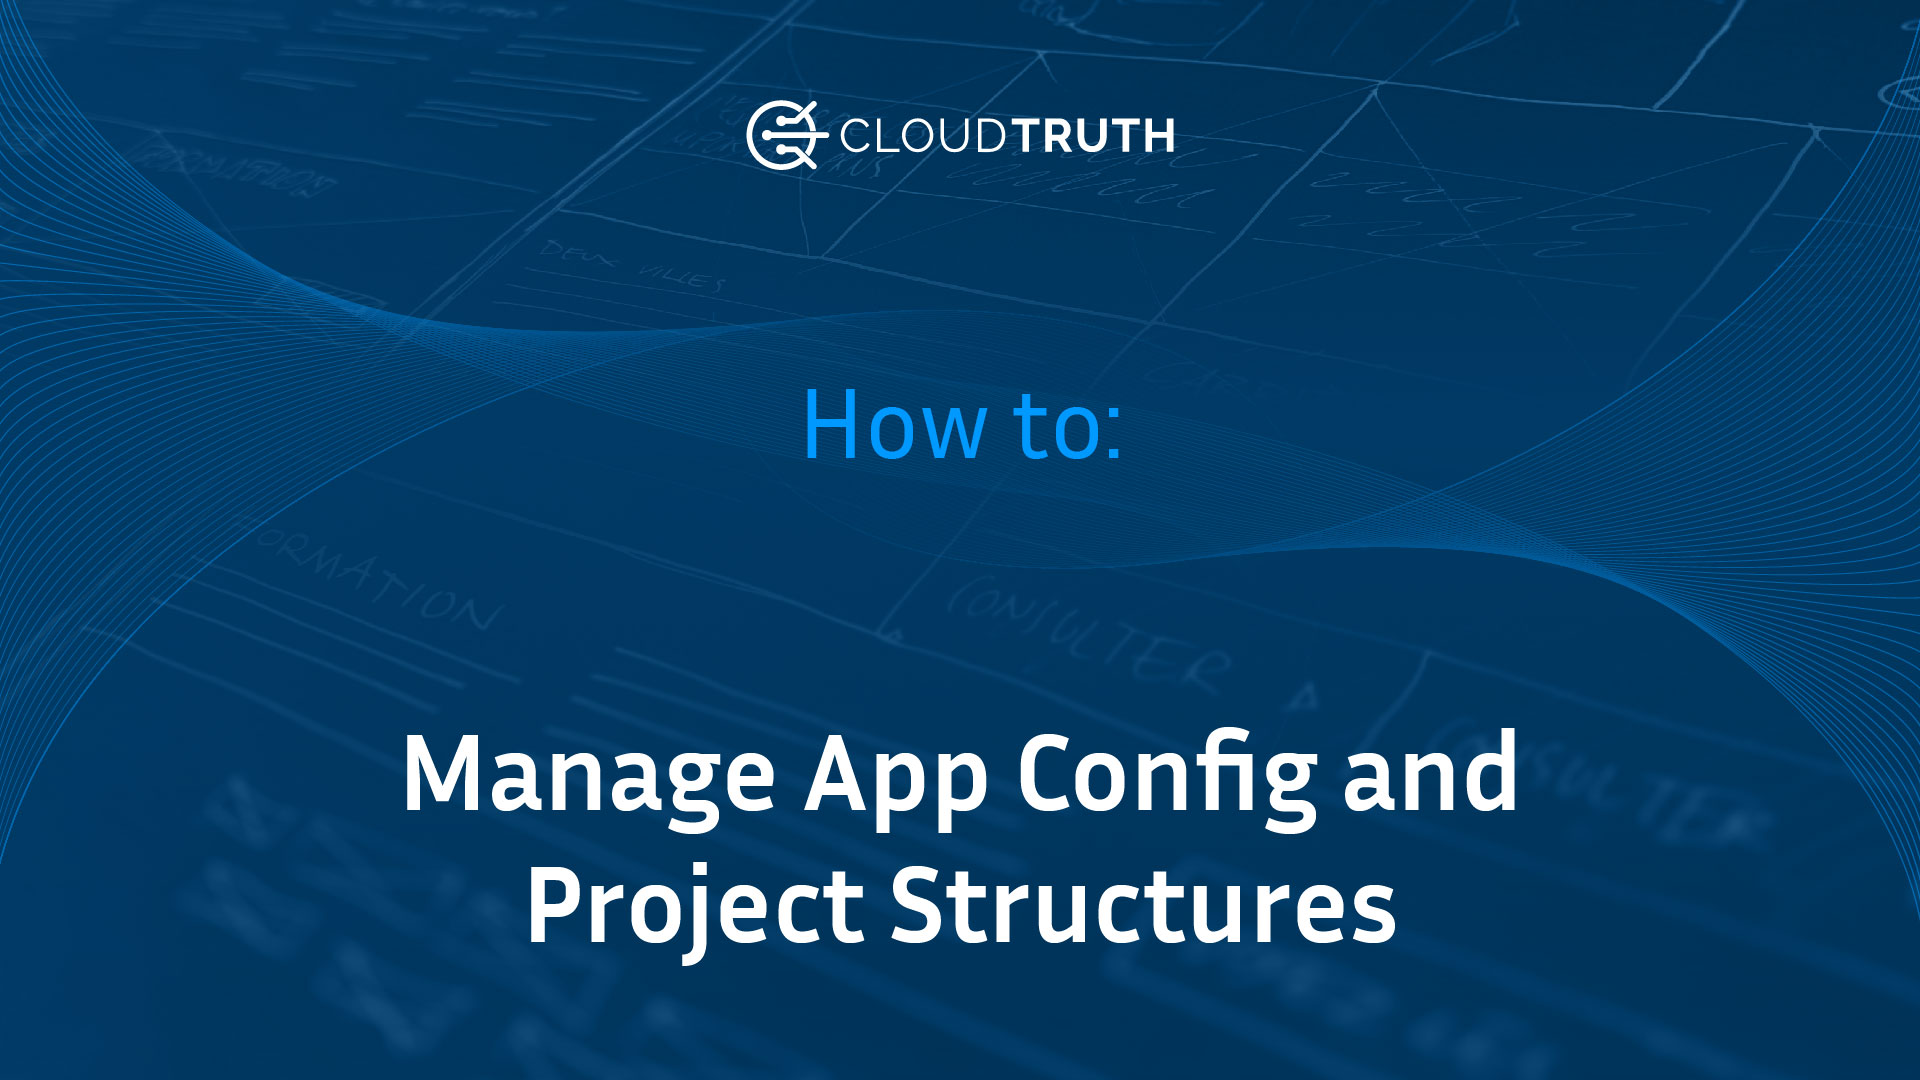 App Configuration and Project Structure in Cloudtruth